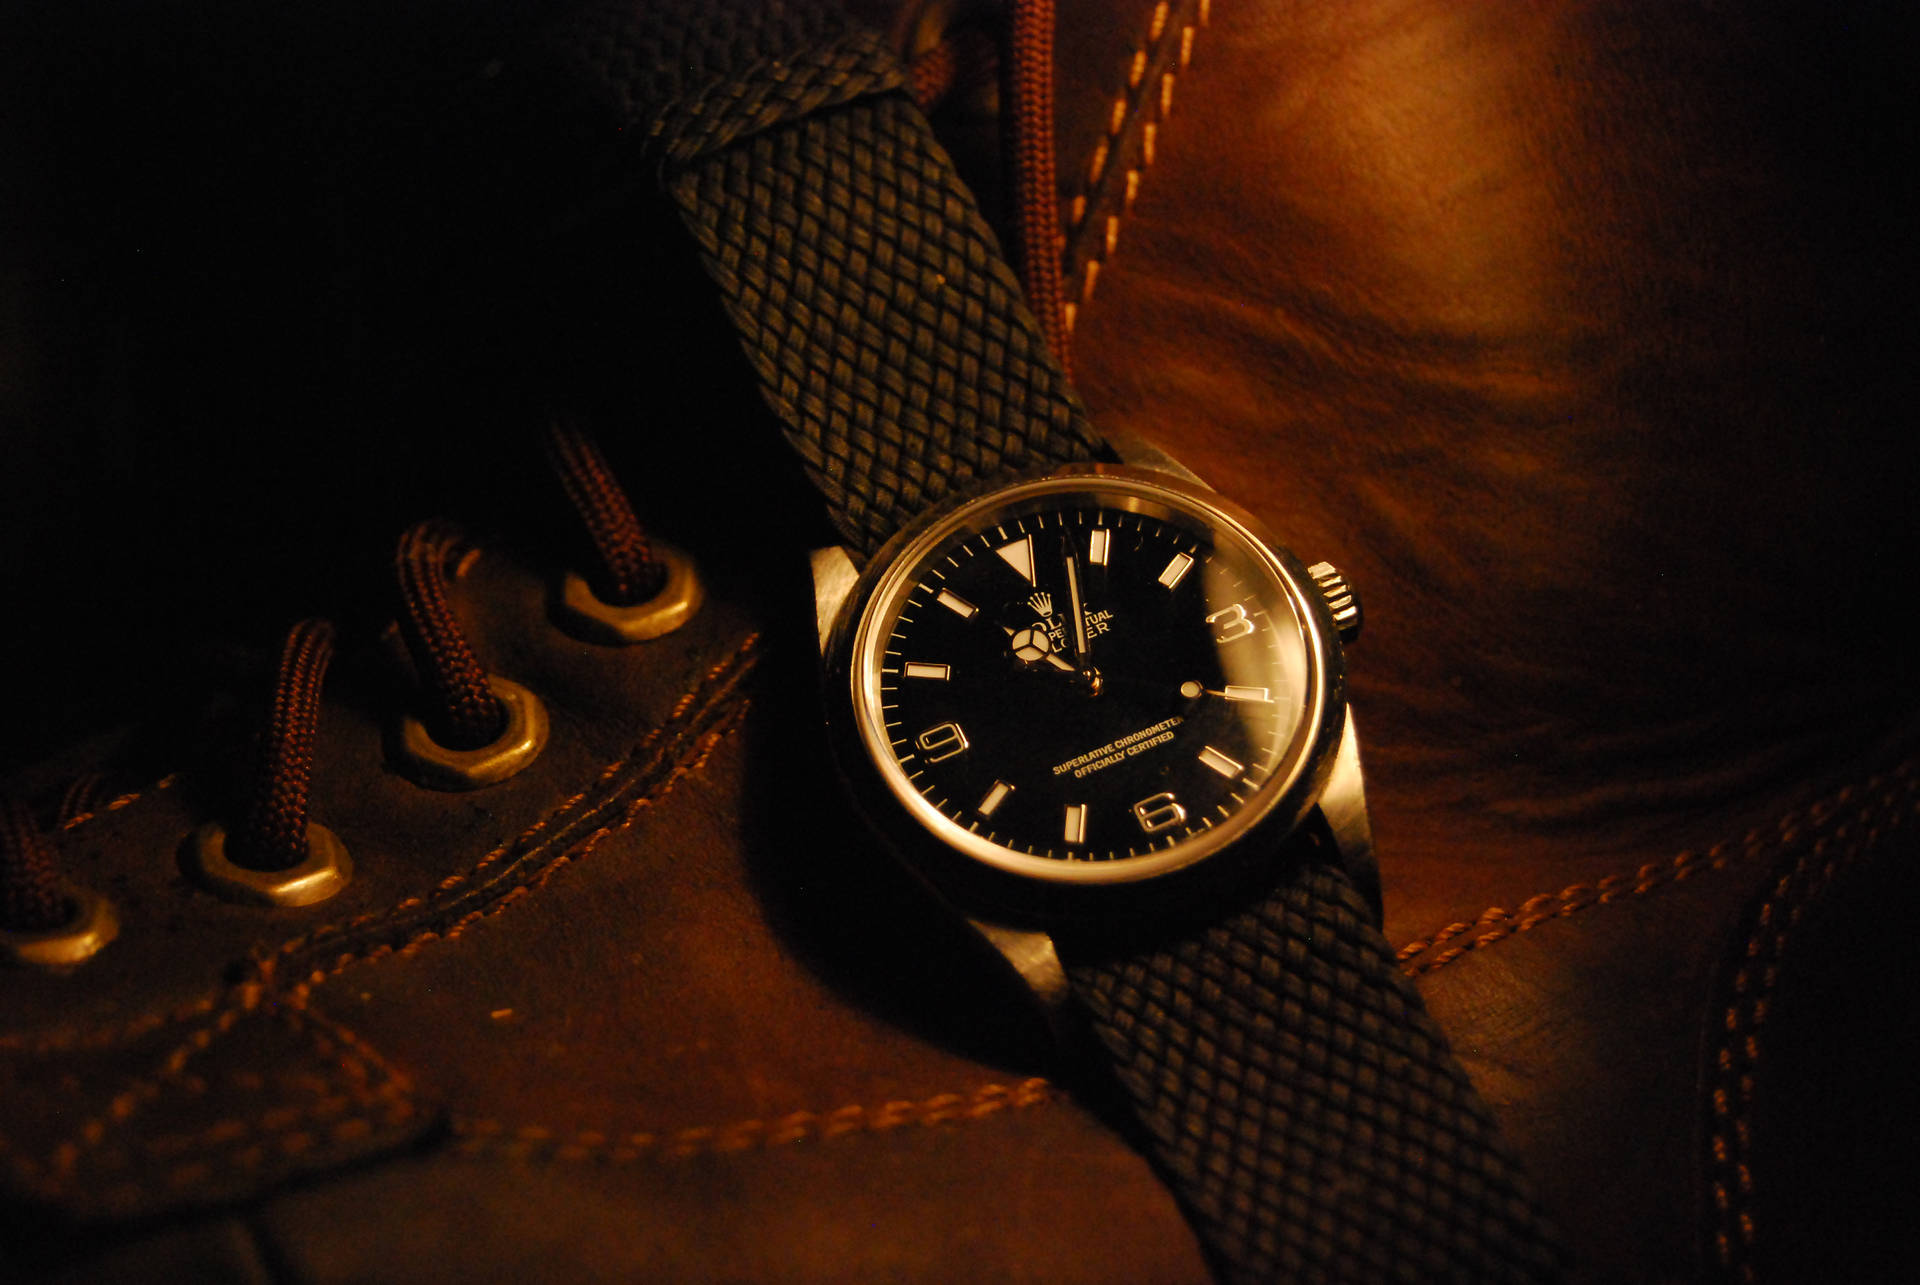 Rolex Watch And Boot Background